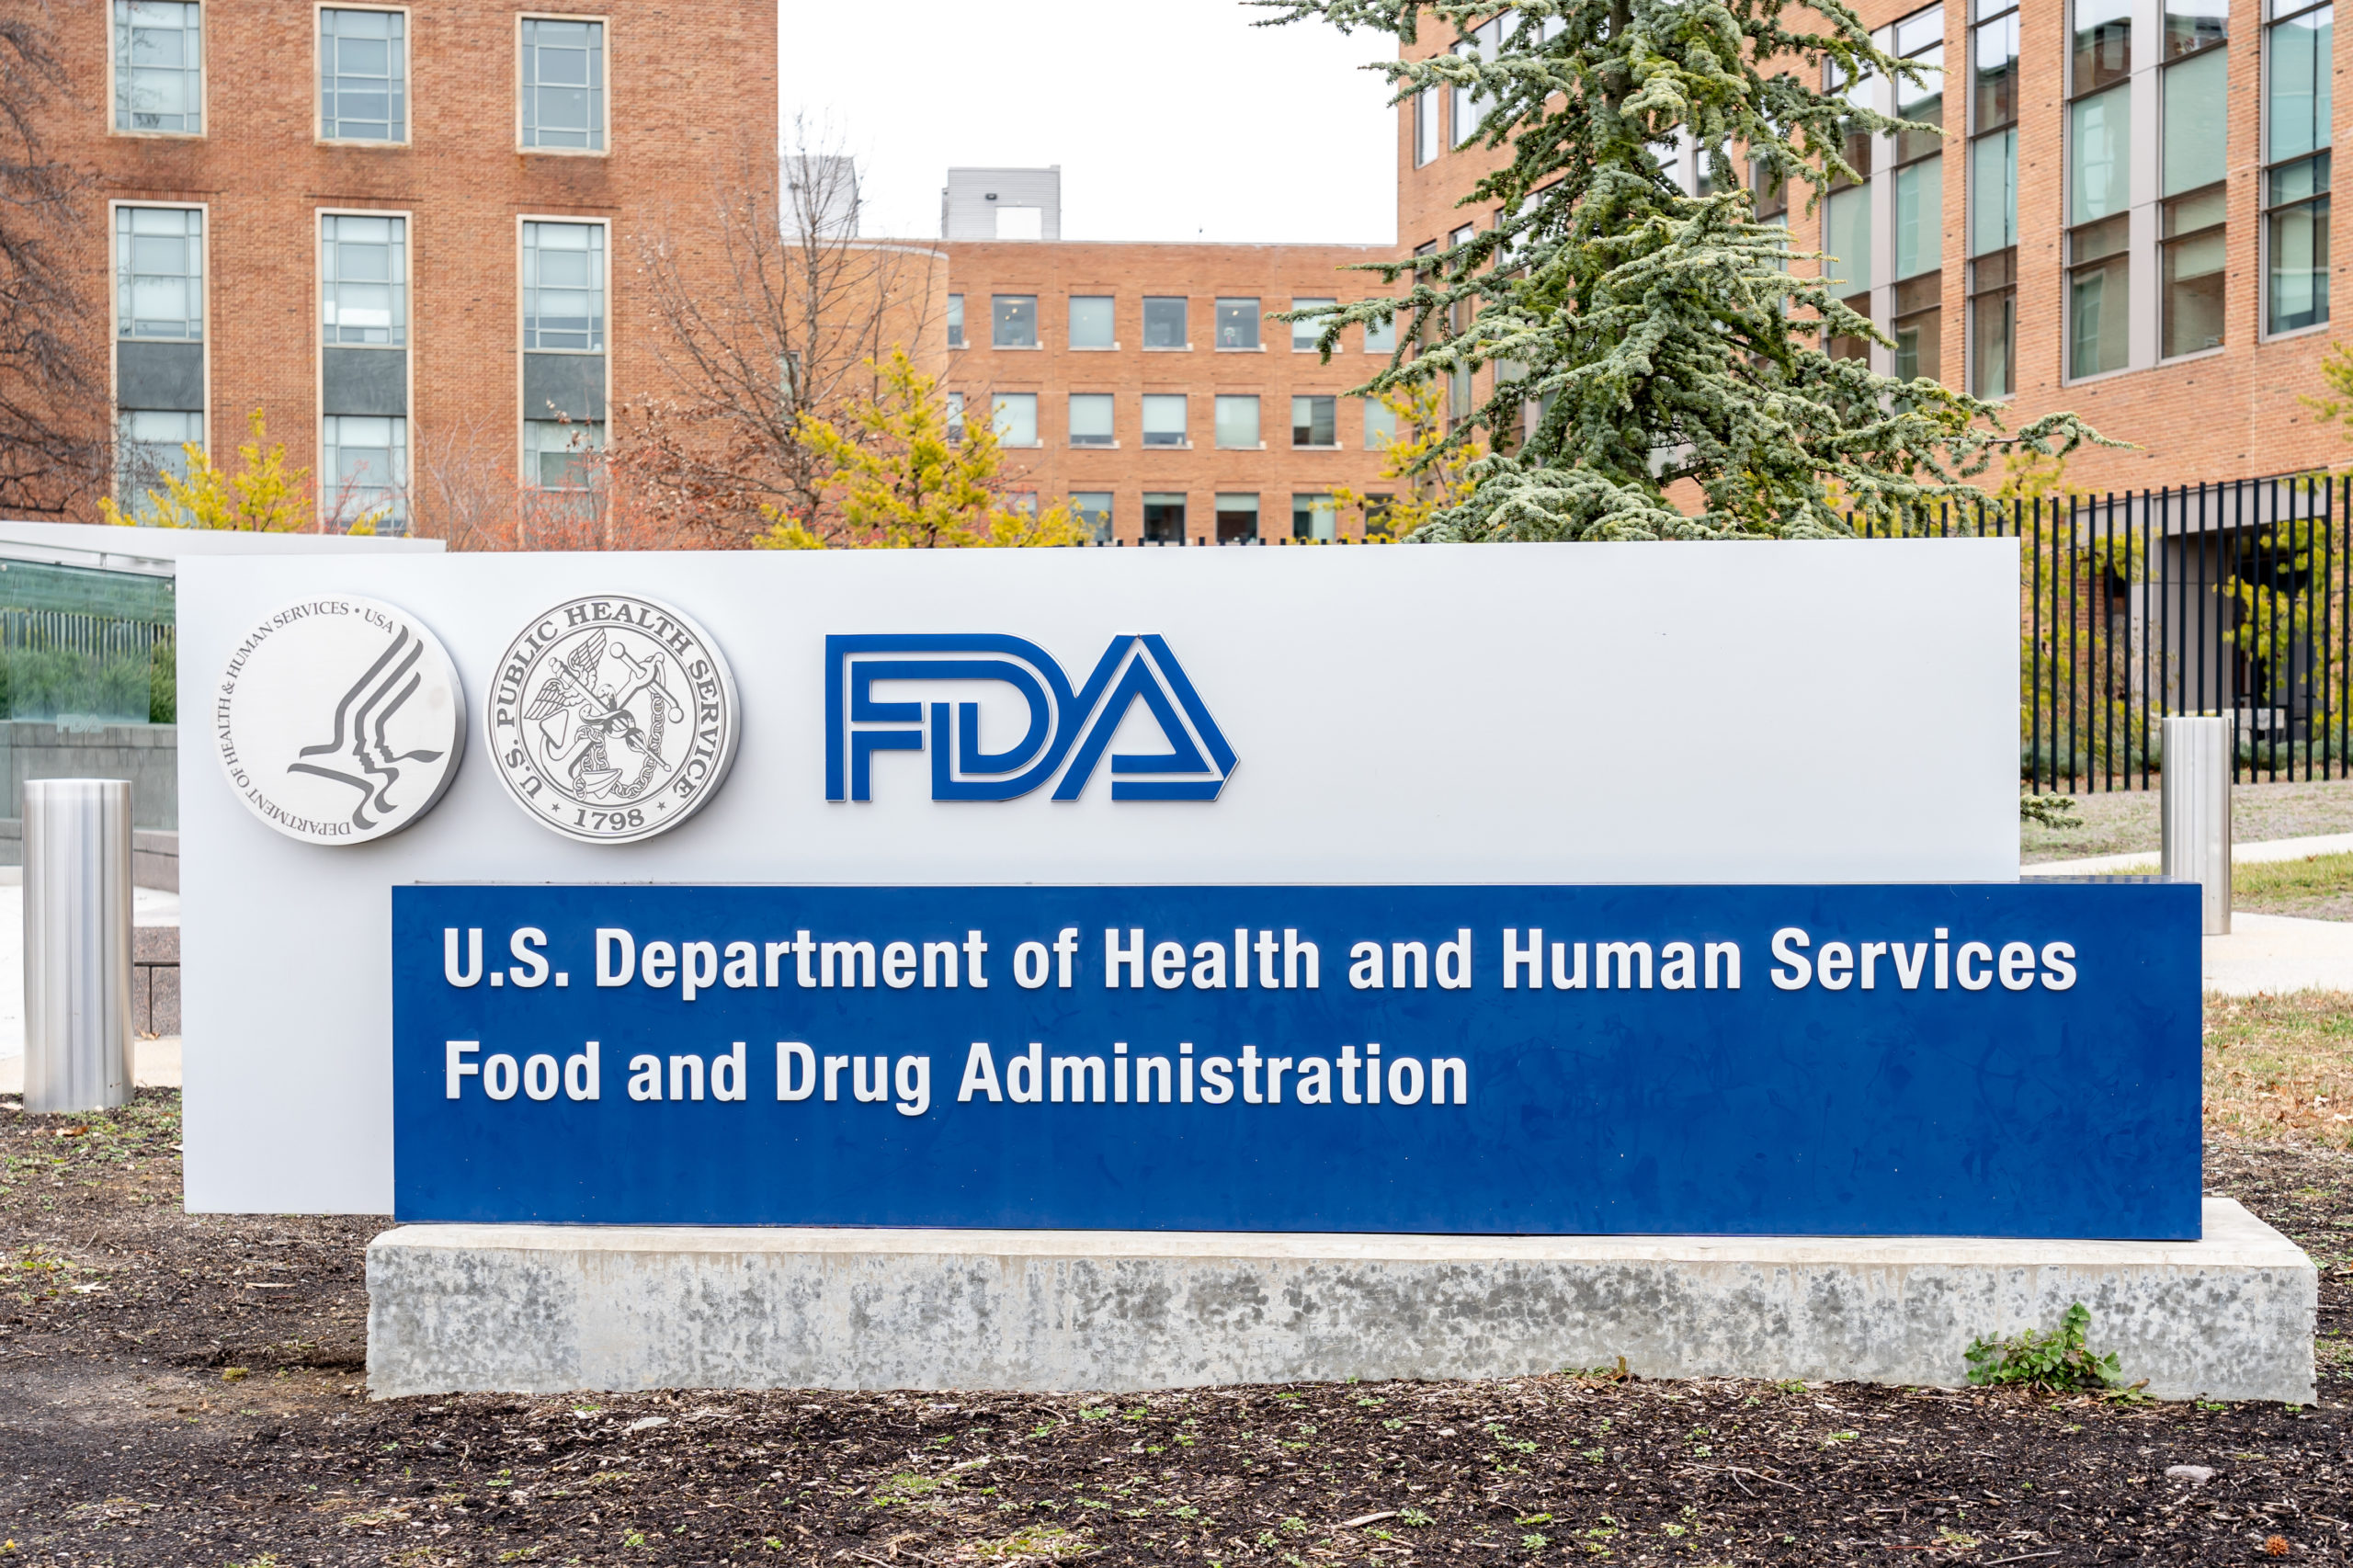 Women Deserve Better than What the FDA Has Given Us